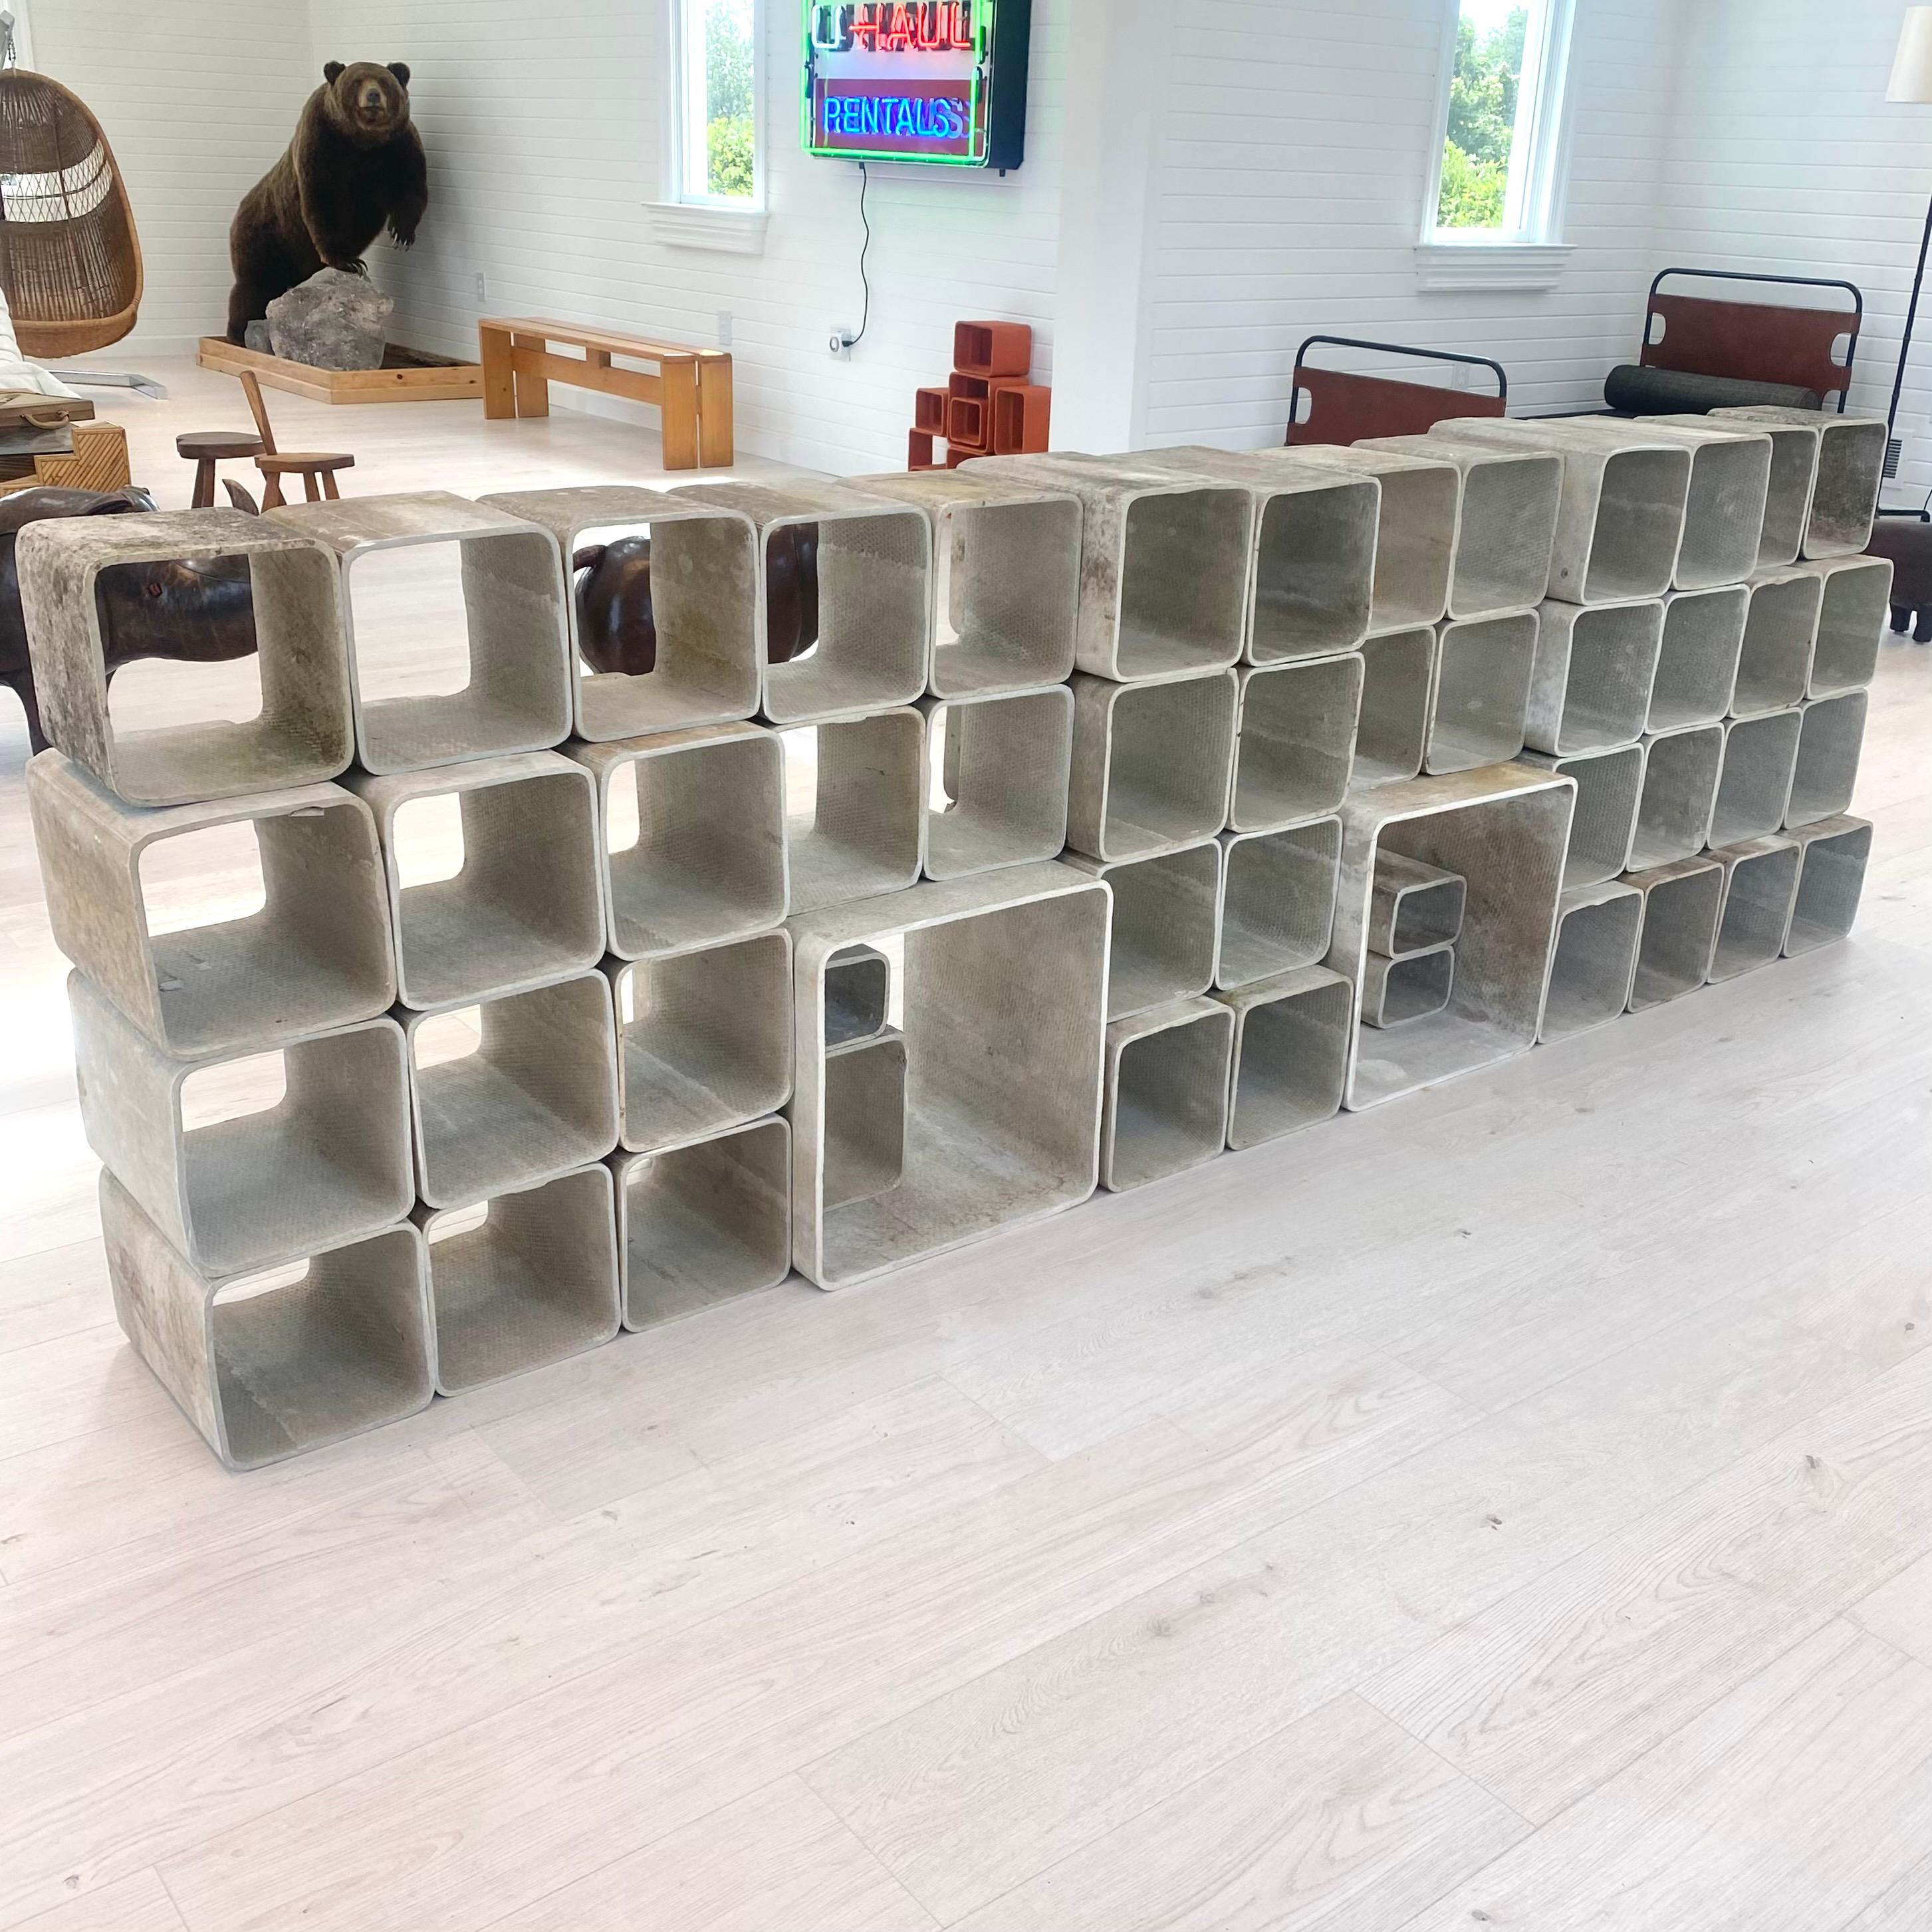 Stunning monumental 50 piece concrete bookcase by Willy Guhl. Made up of 4 different sized hand-made concrete cubes. Completely modular and able to be arranged in a multitude of ways. Original concrete color. Varying degrees of patina and moss